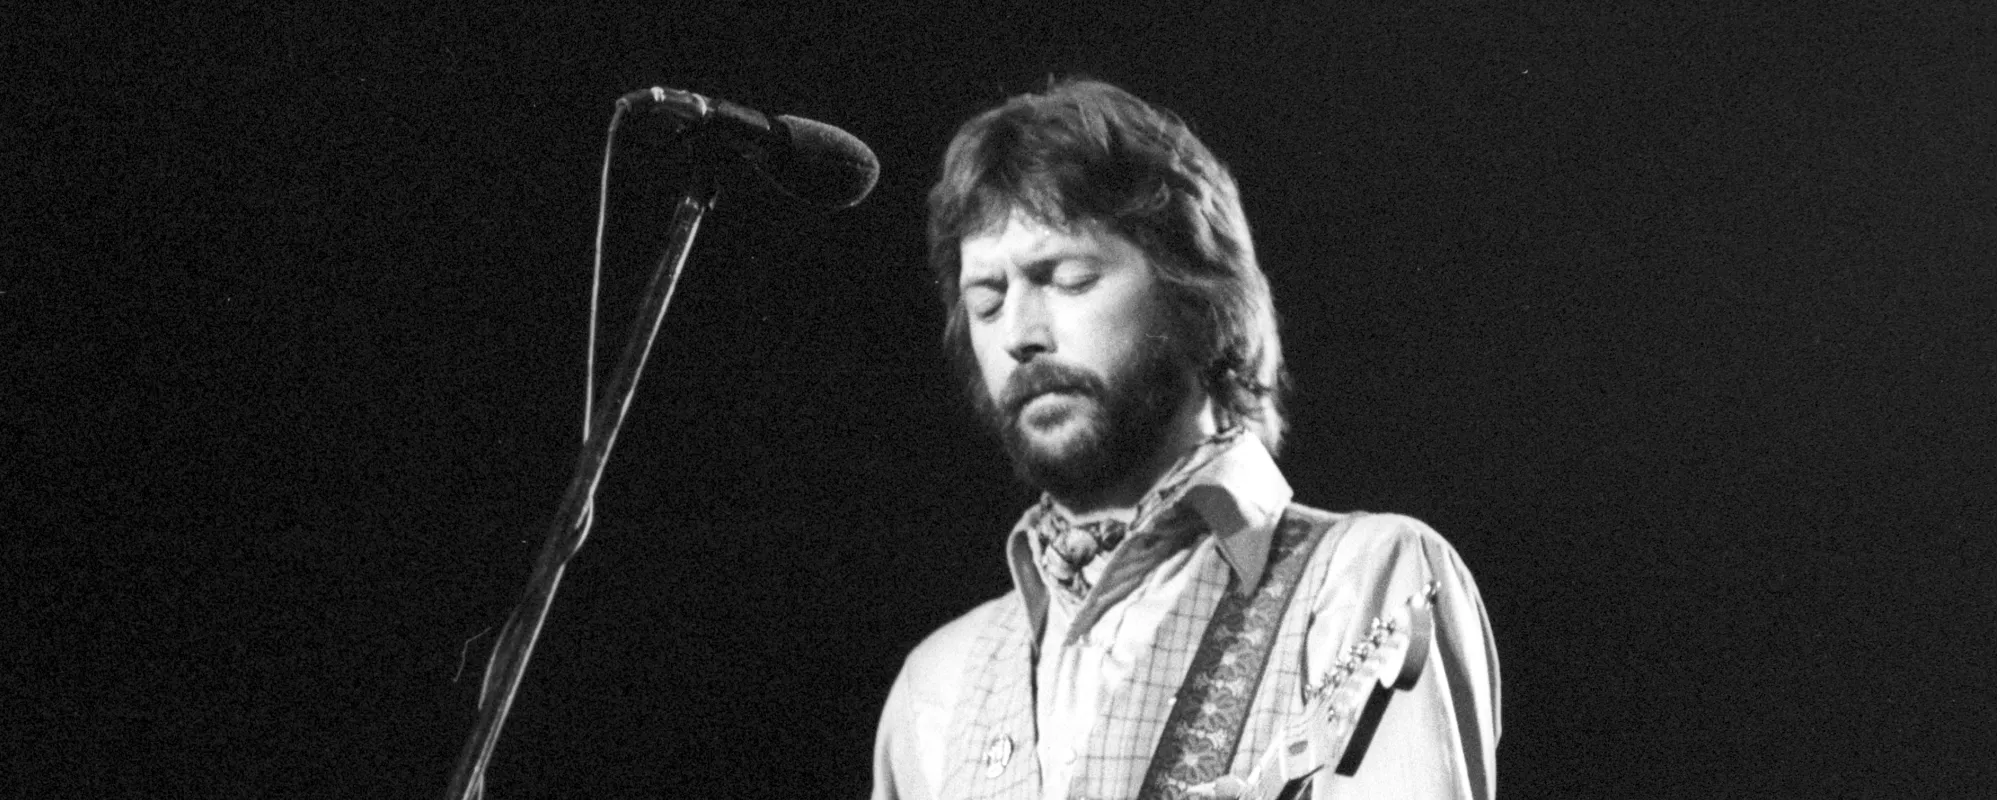 What Do the Lyrics to the Eric Clapton Song “Layla” Mean?